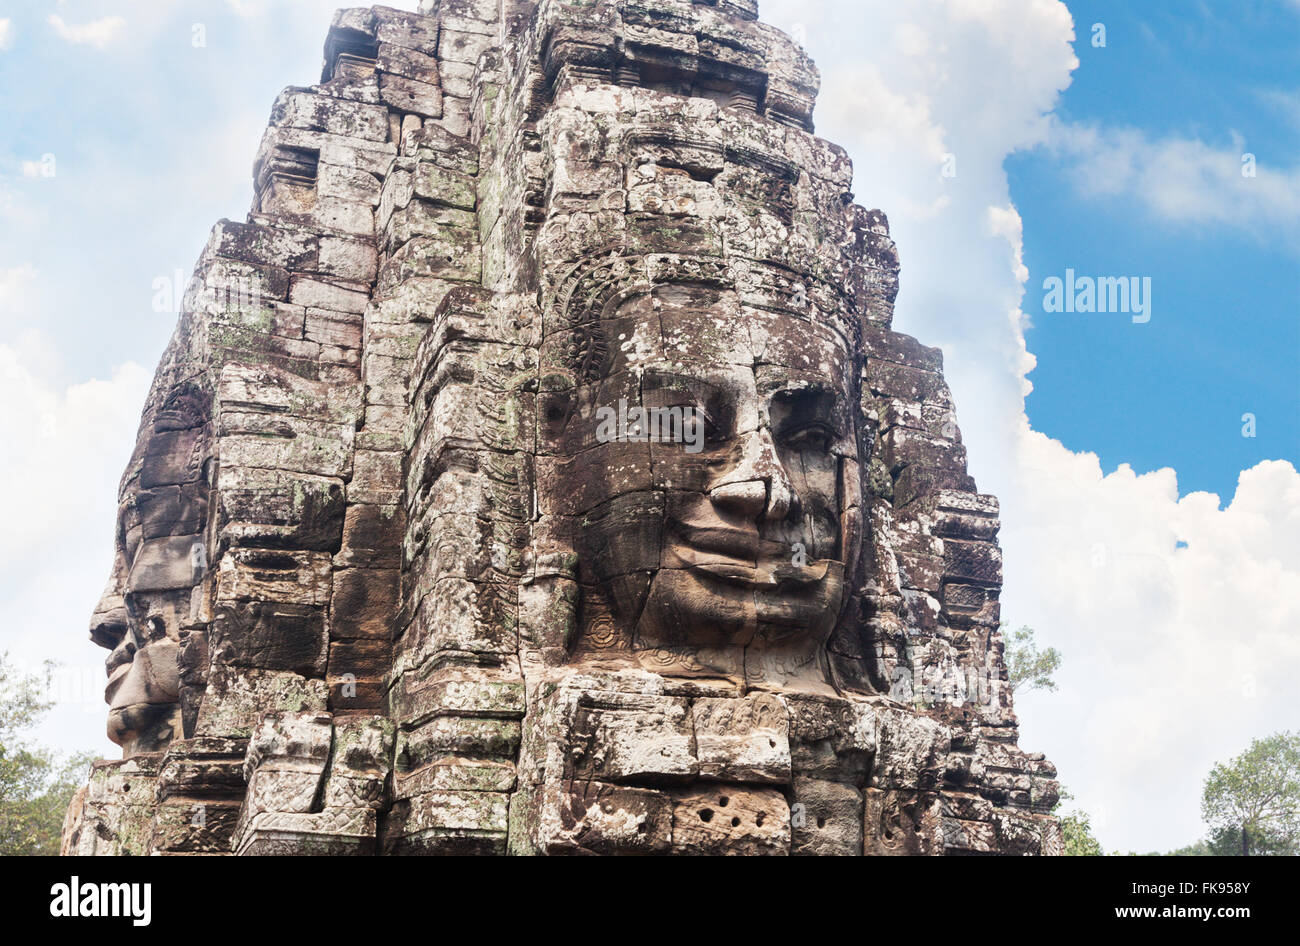 Faces of Bayon temple in Angkor Thom, Siemreap, Cambodia. Stock Photo